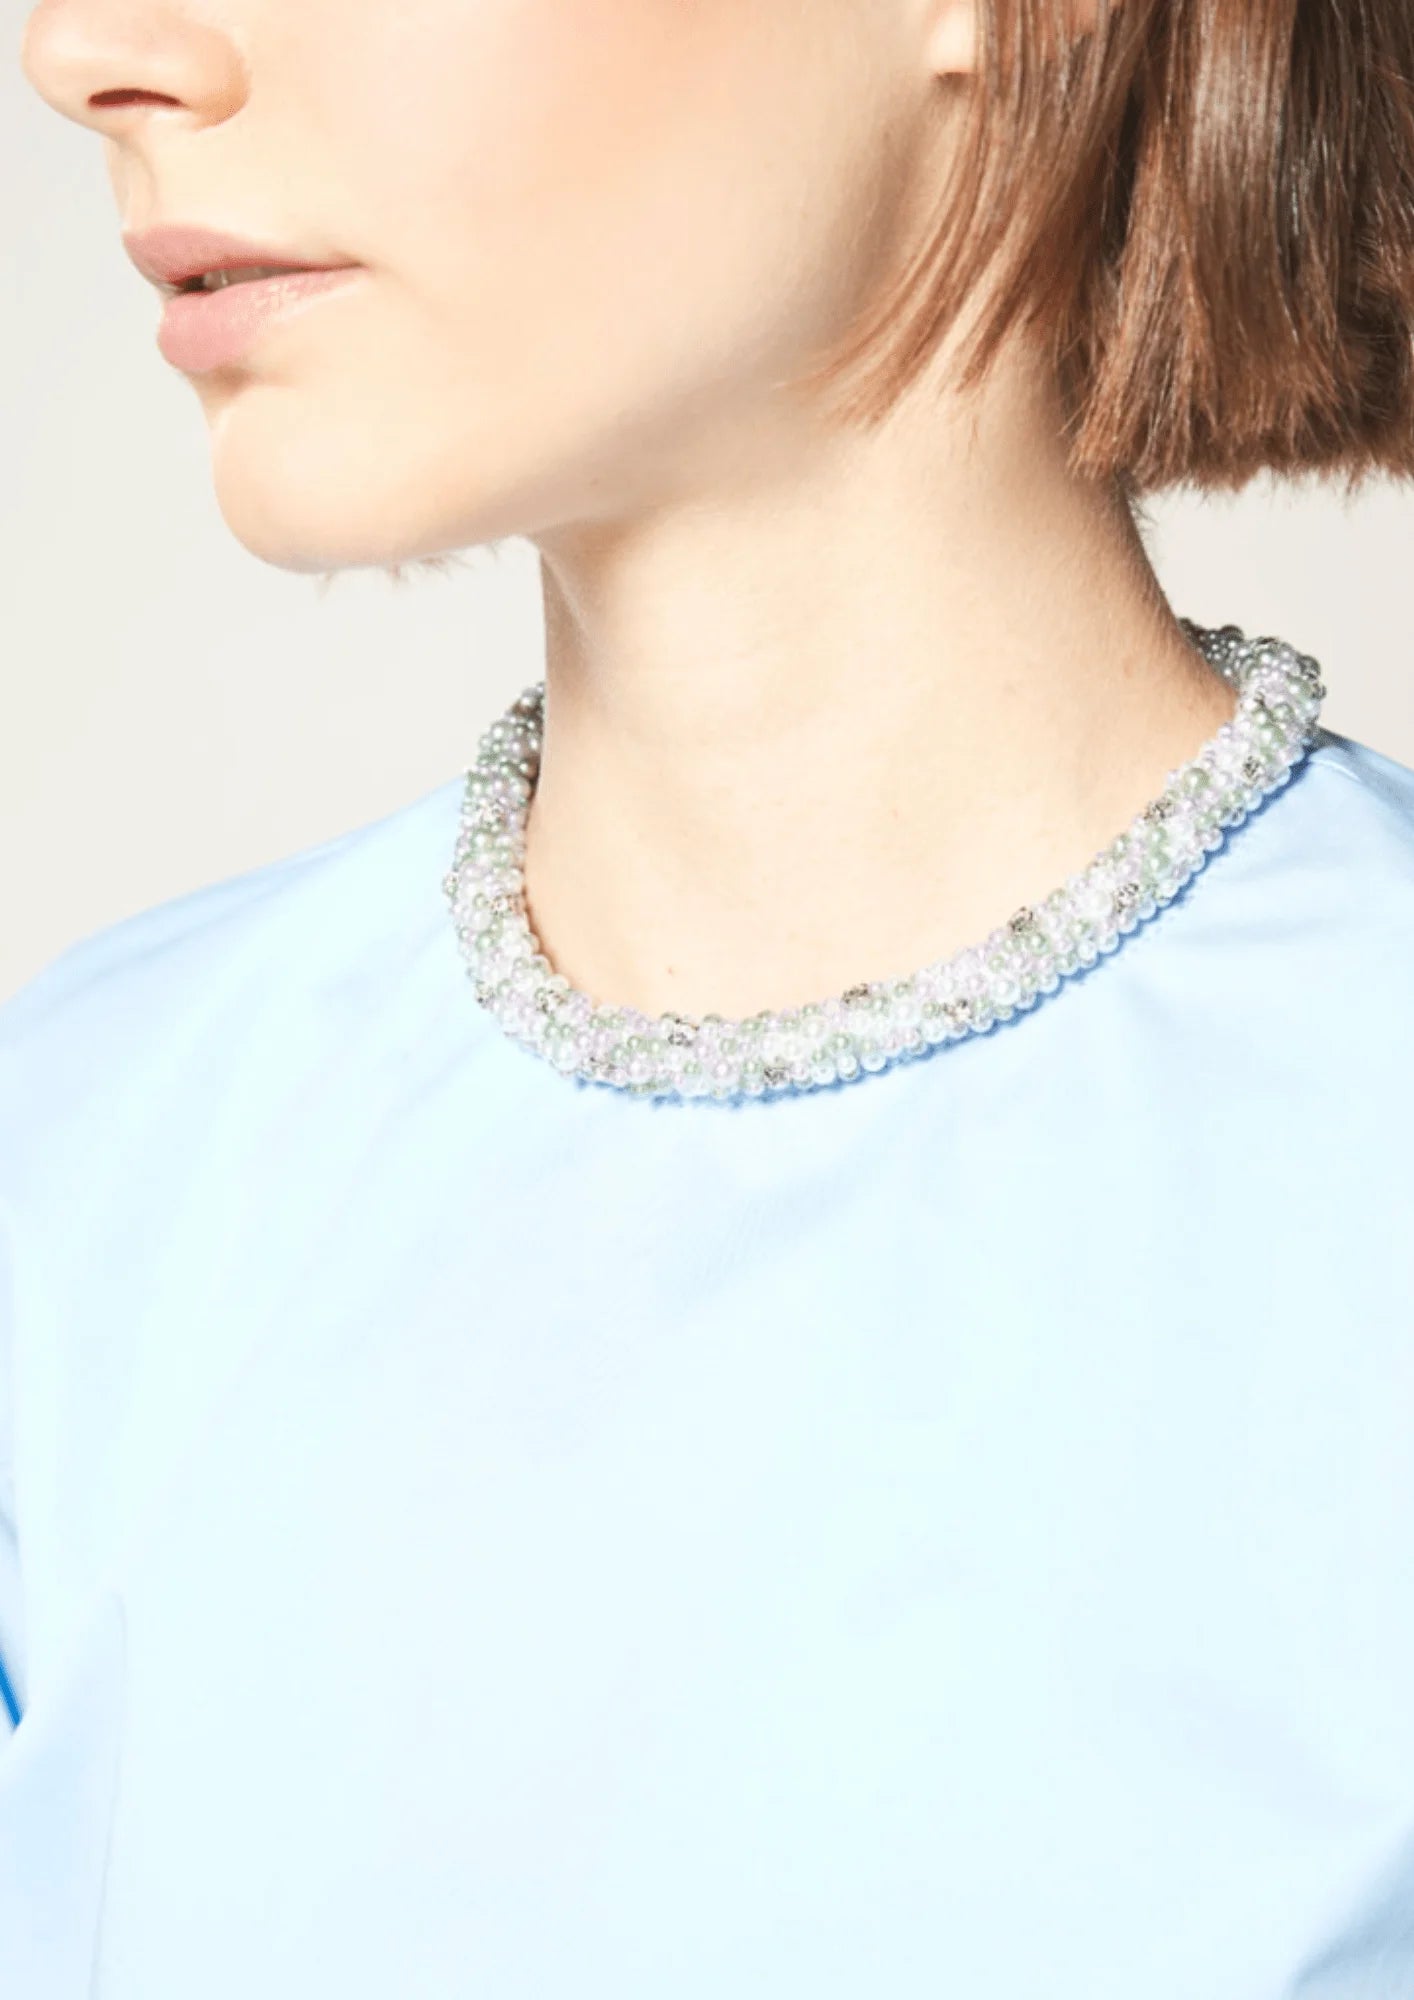 LIGHT BLUE TOP WITH DECORATIVE PEARLS